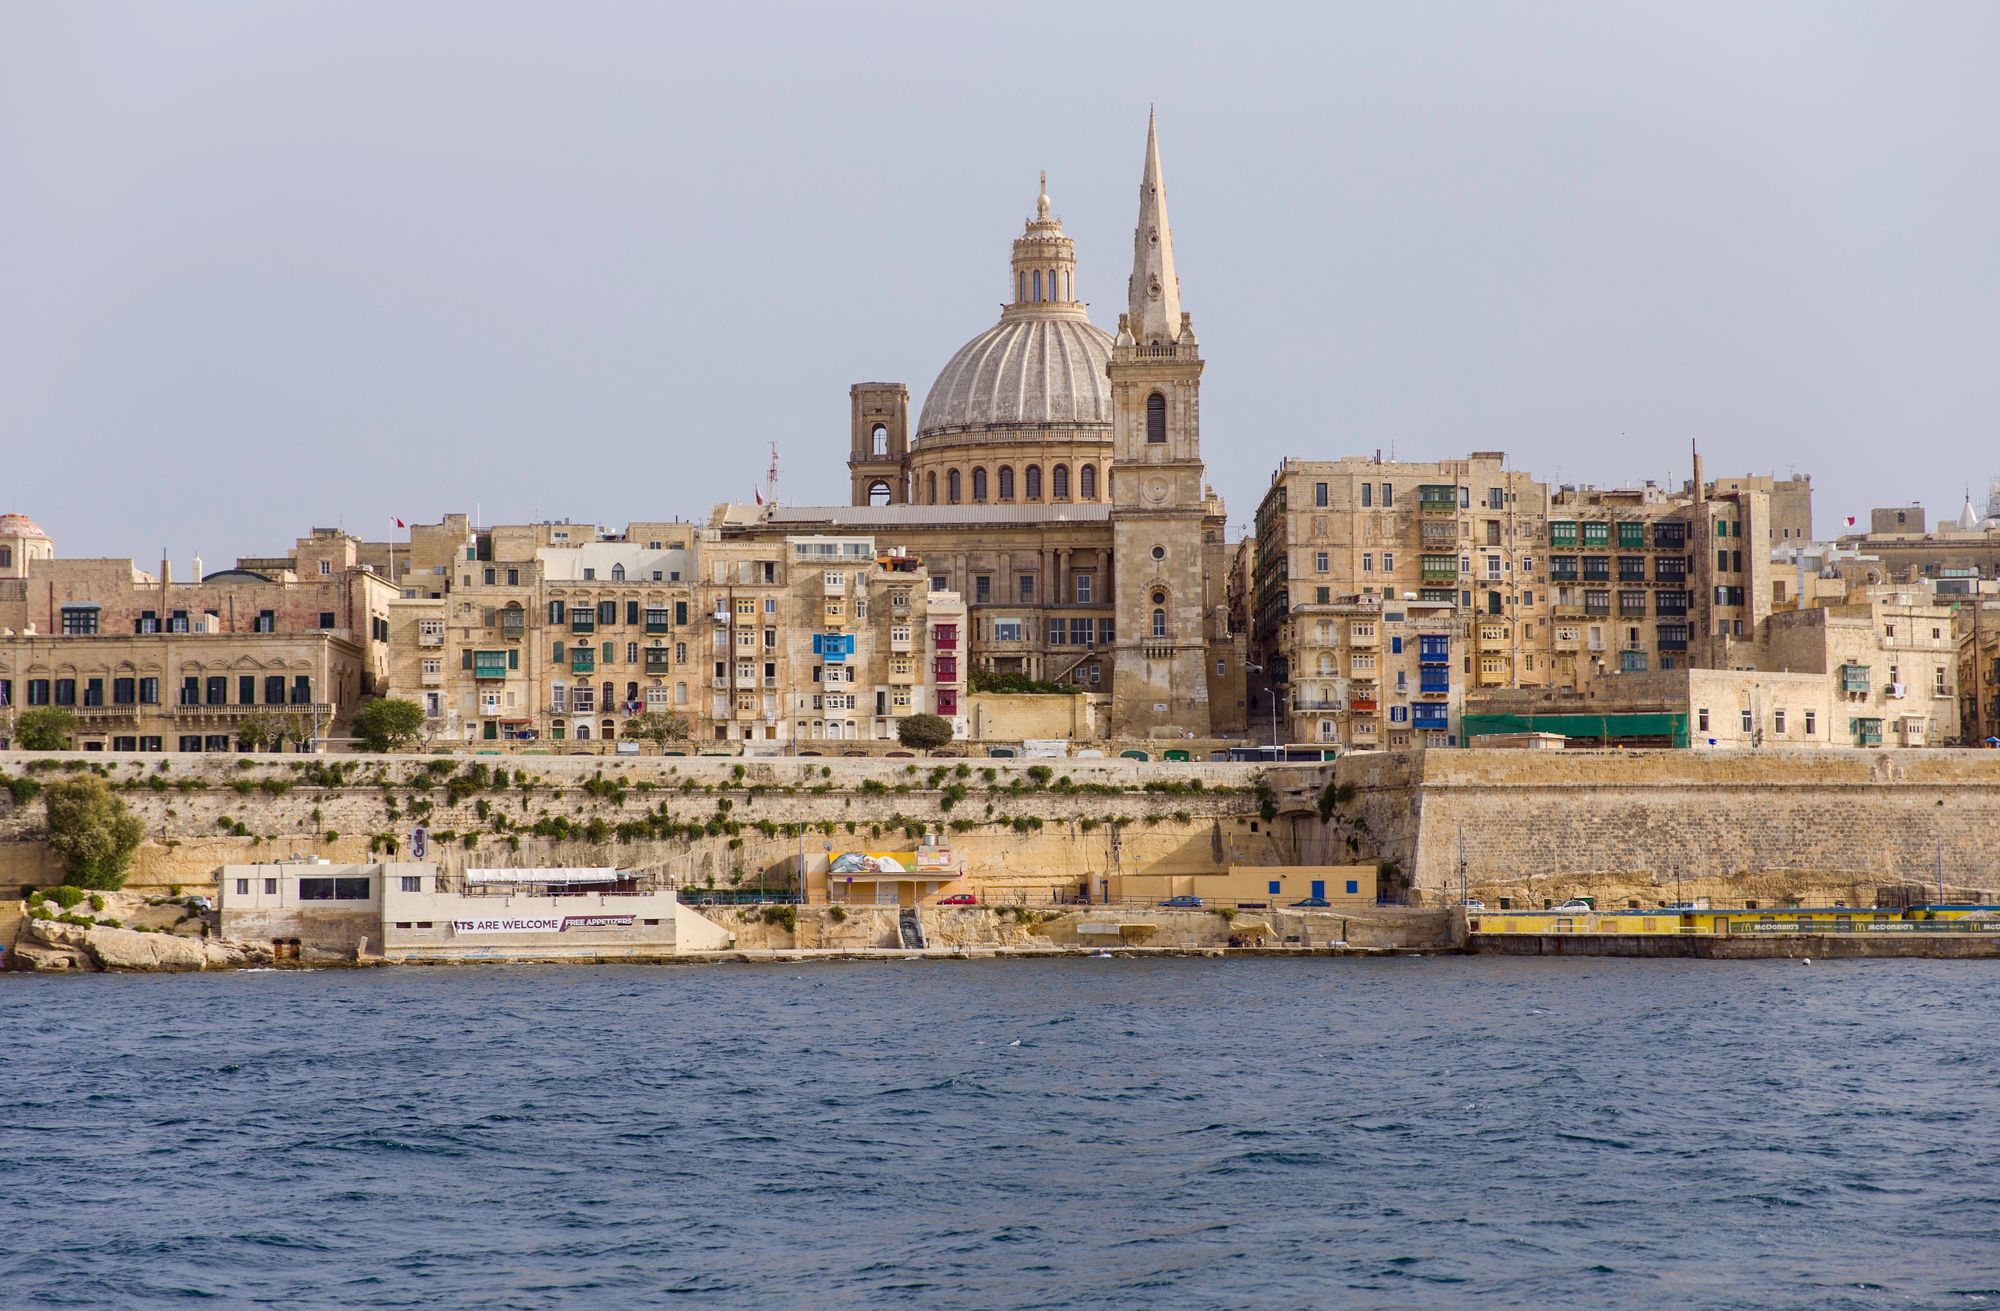 Malta in the making: The newly introduced crypto and DLT legal framework.